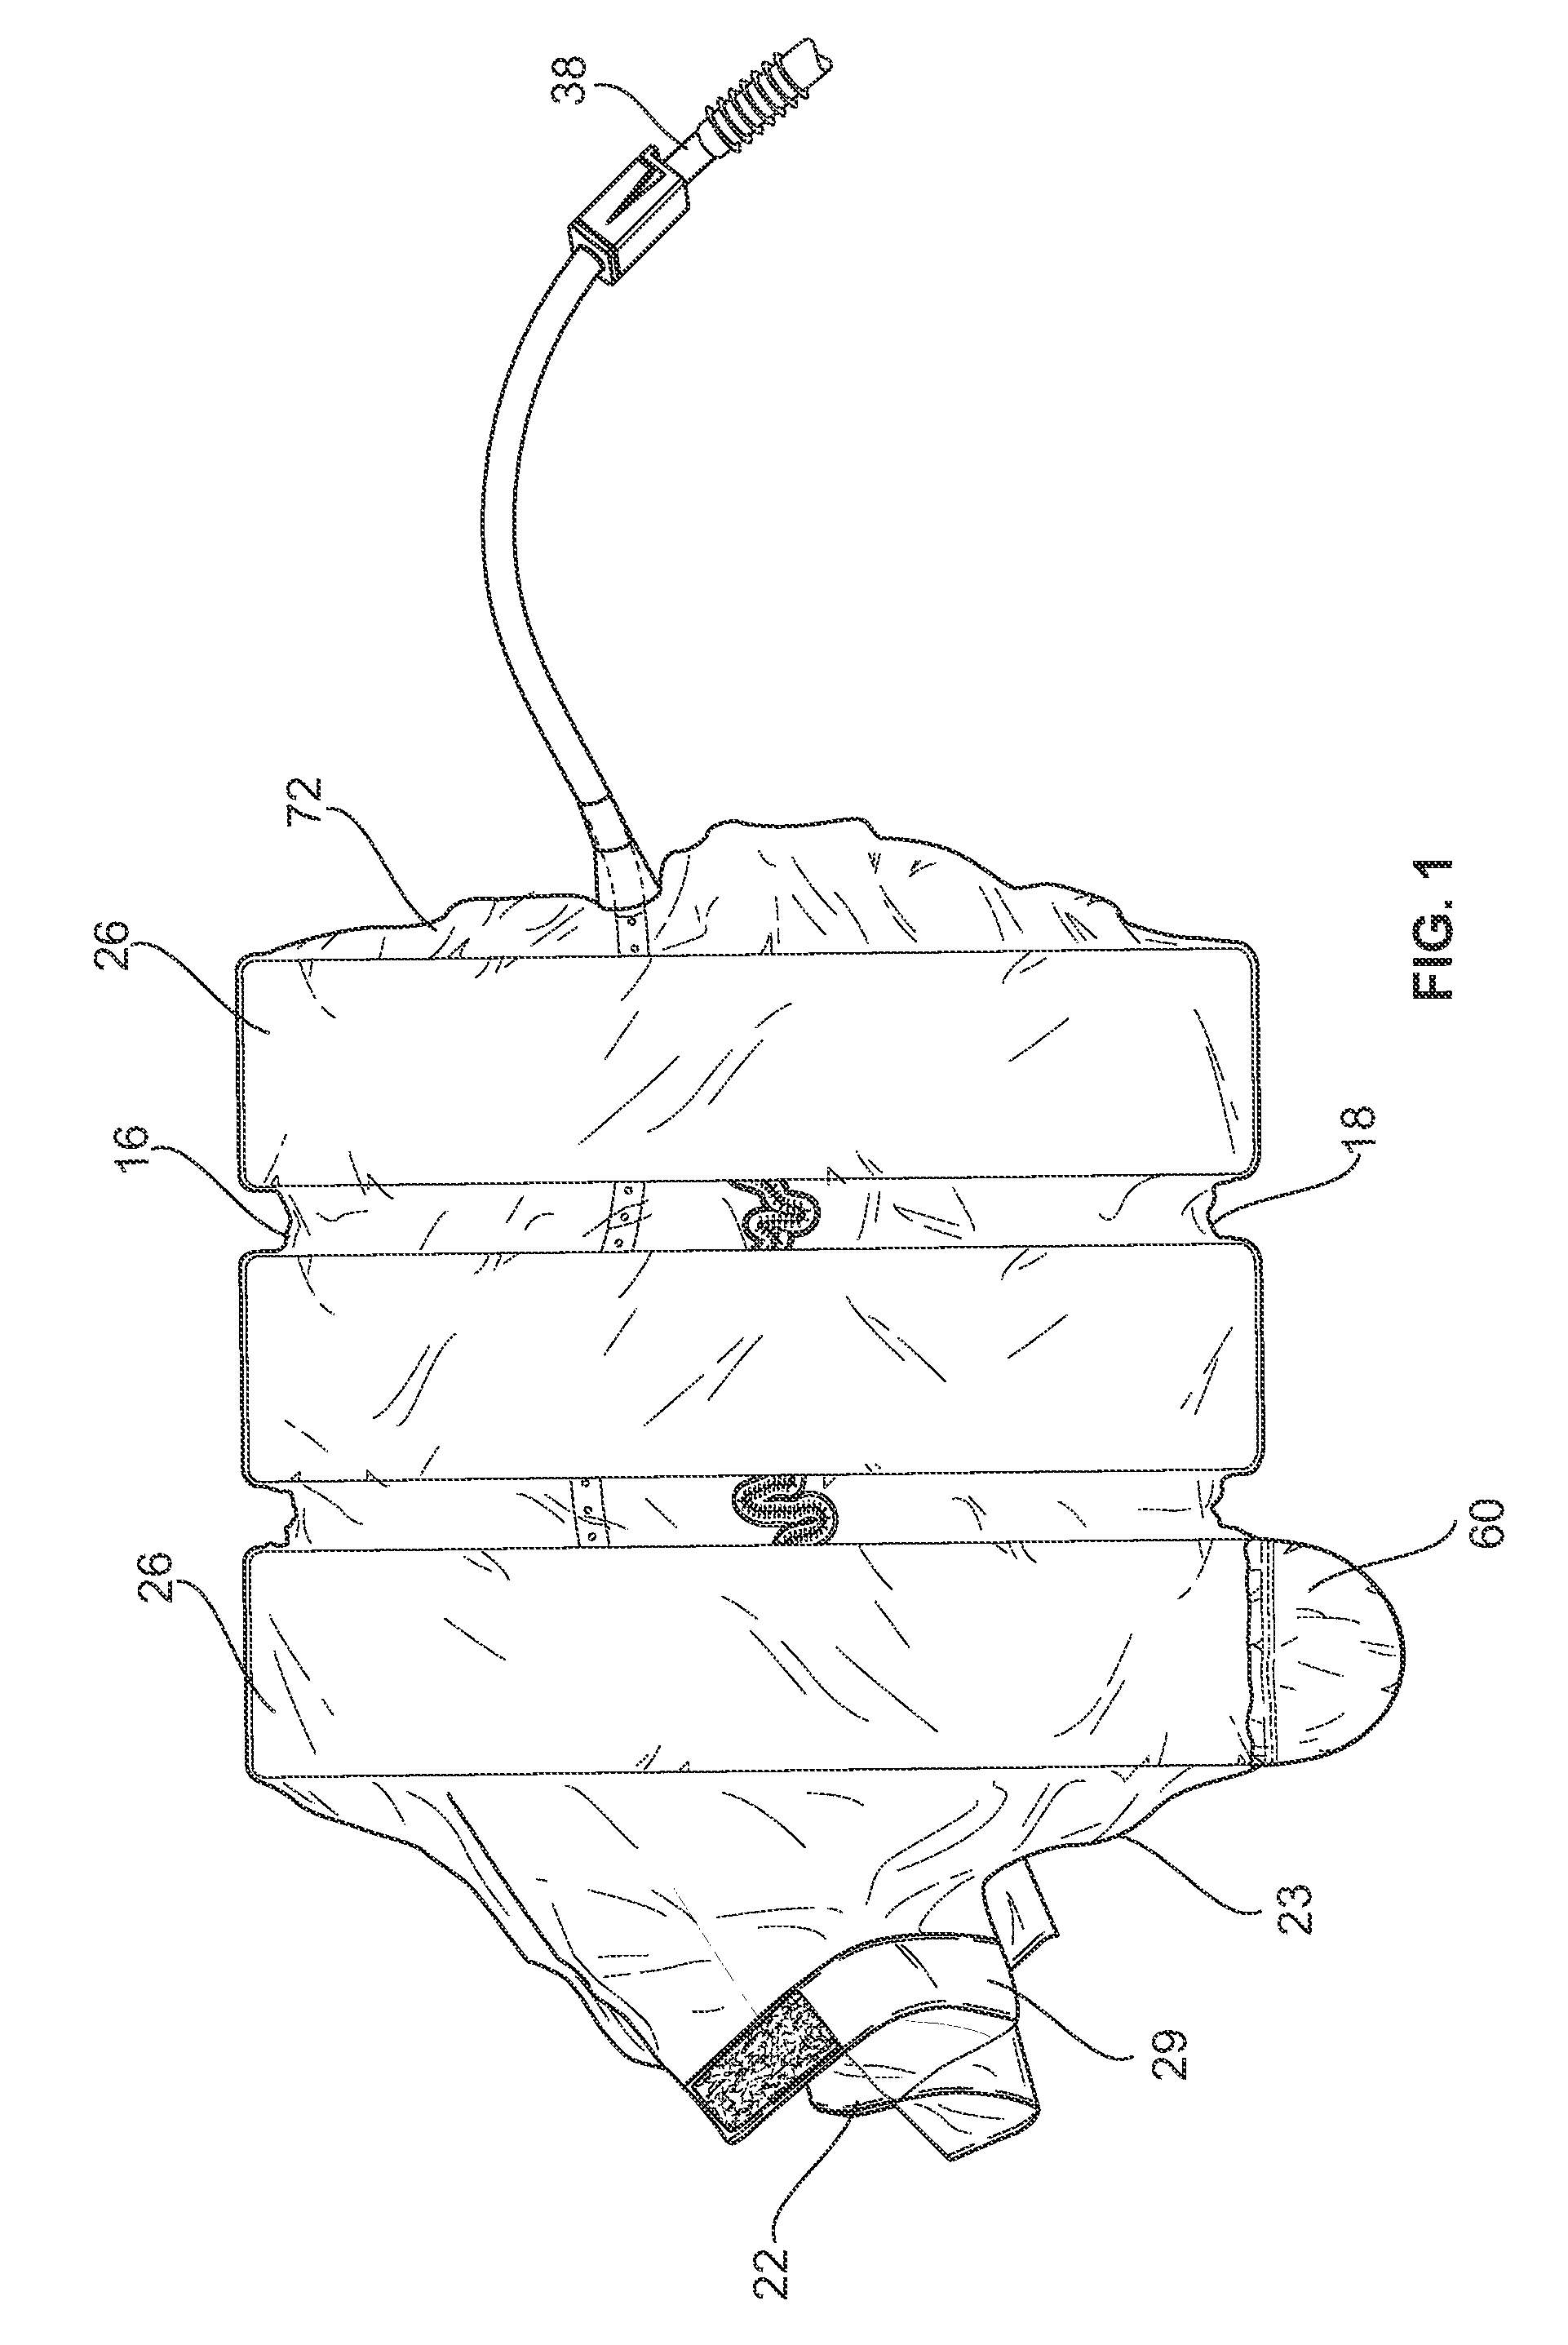 Collapsible fluid containment device with semi-rigid support members